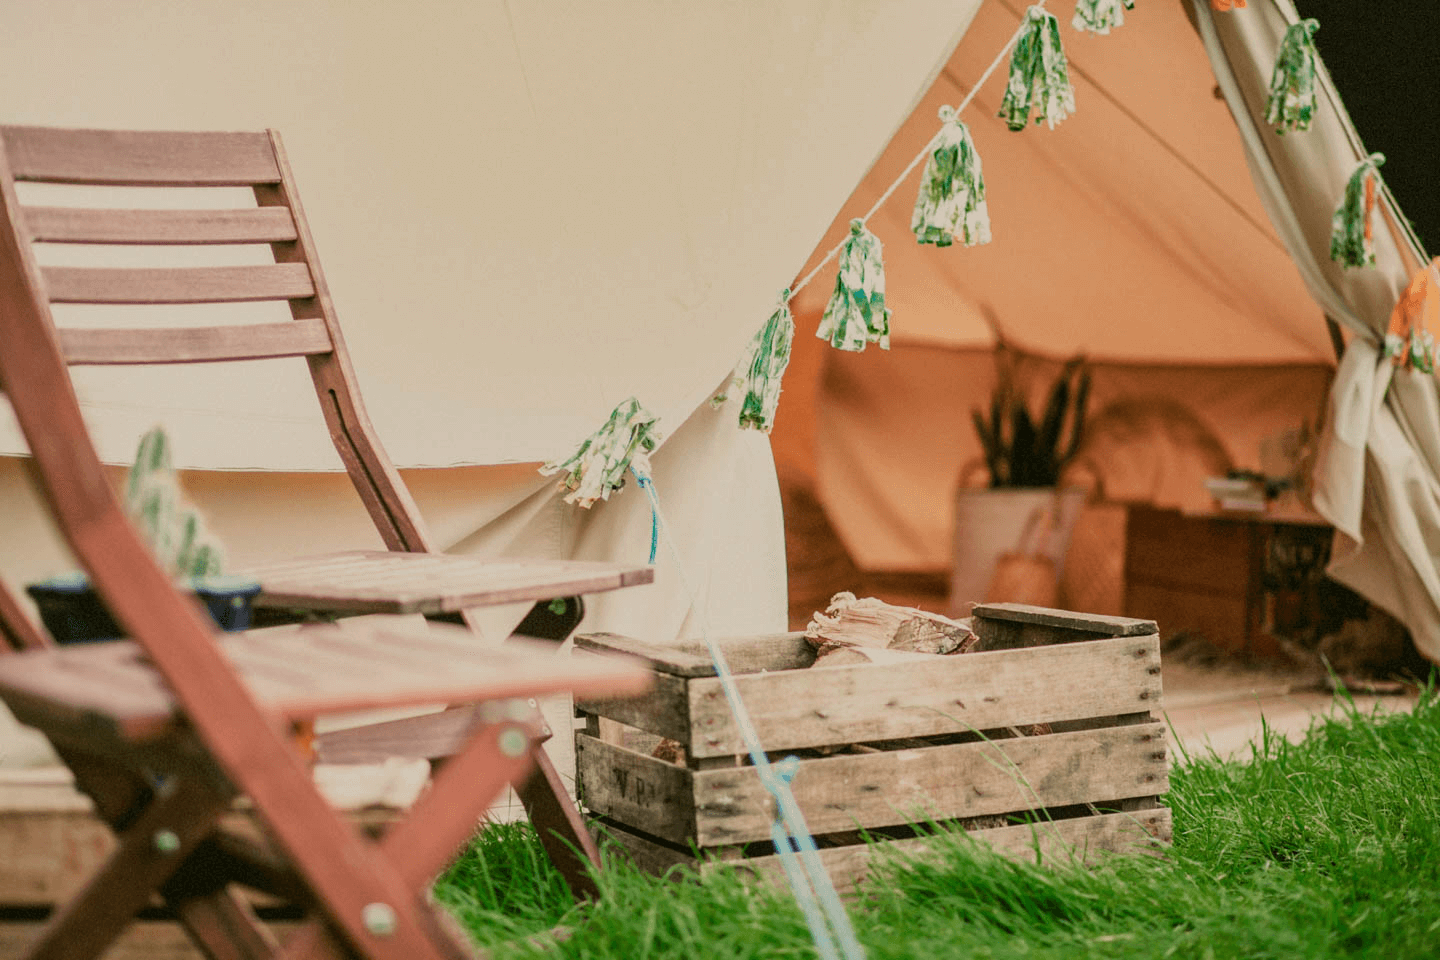 5M Bell Tent